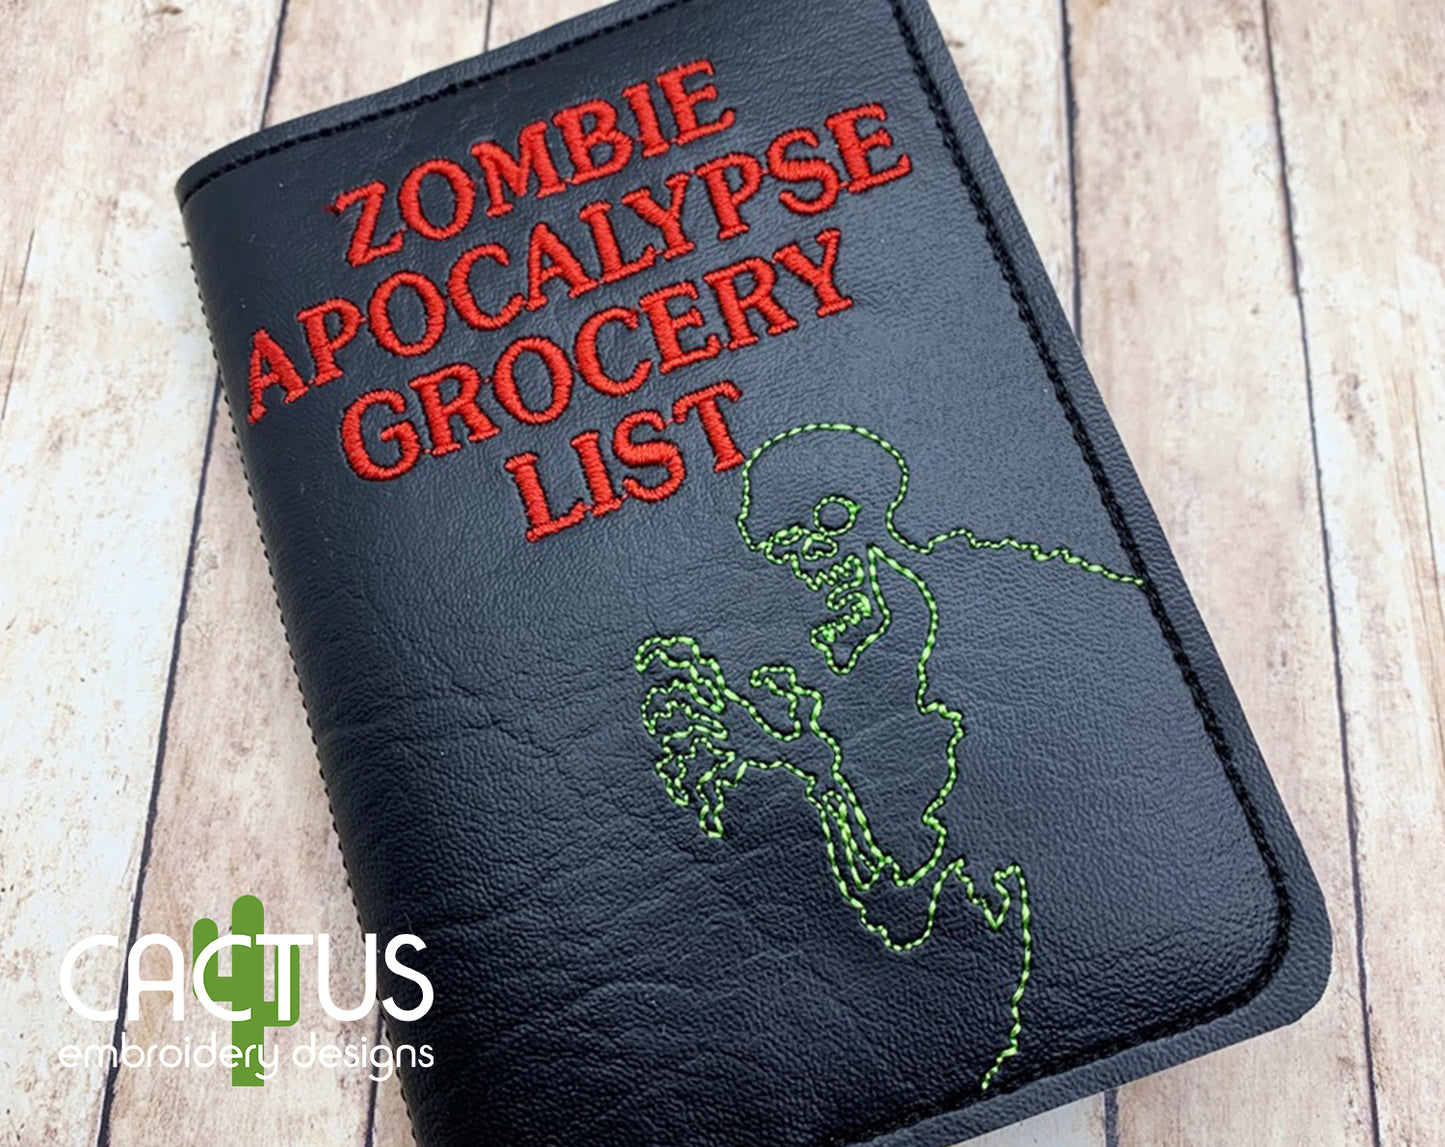 ZA Grocery List Notebook Cover